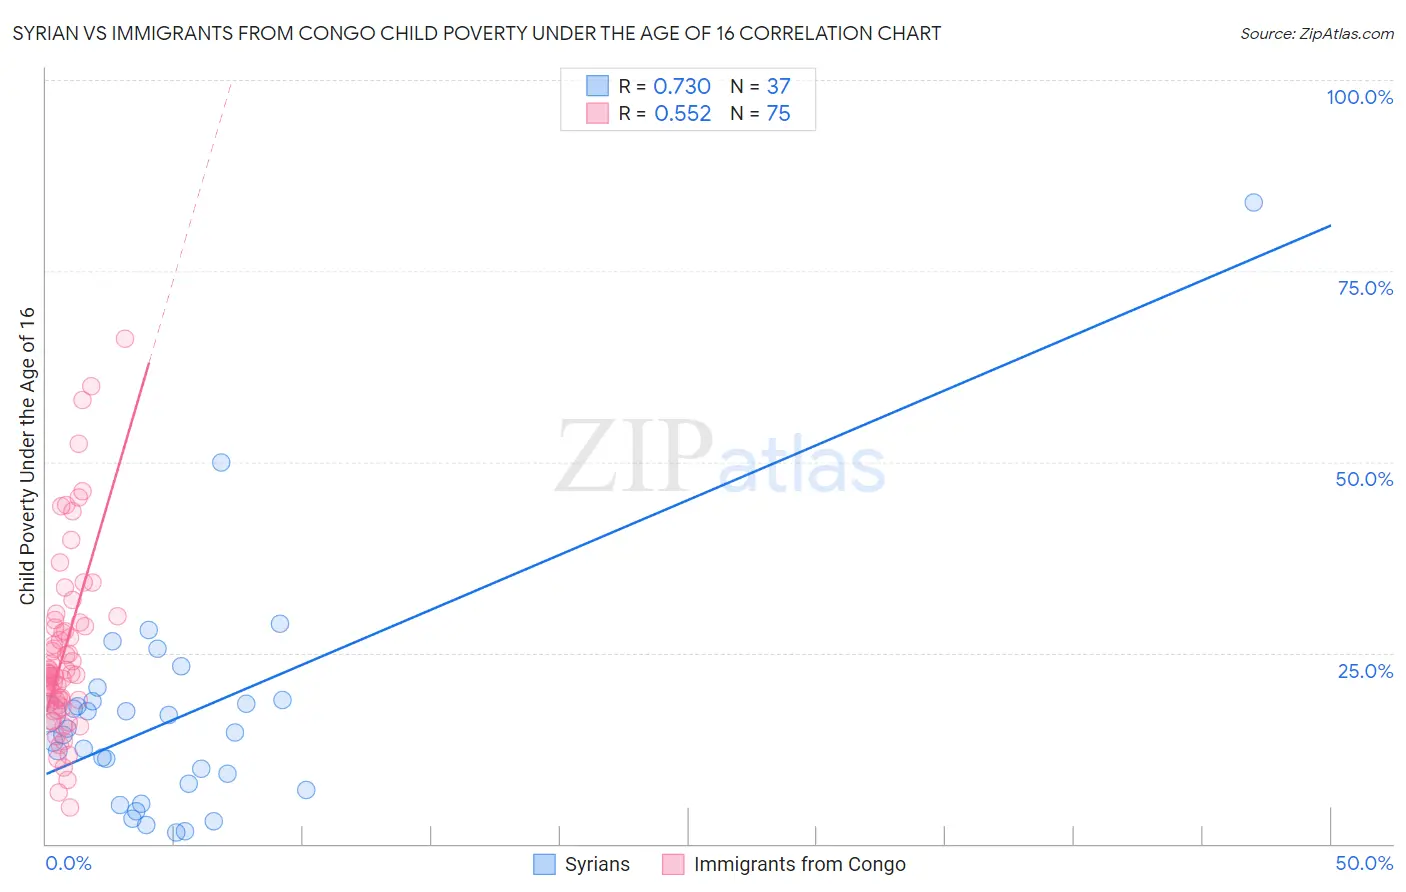 Syrian vs Immigrants from Congo Child Poverty Under the Age of 16